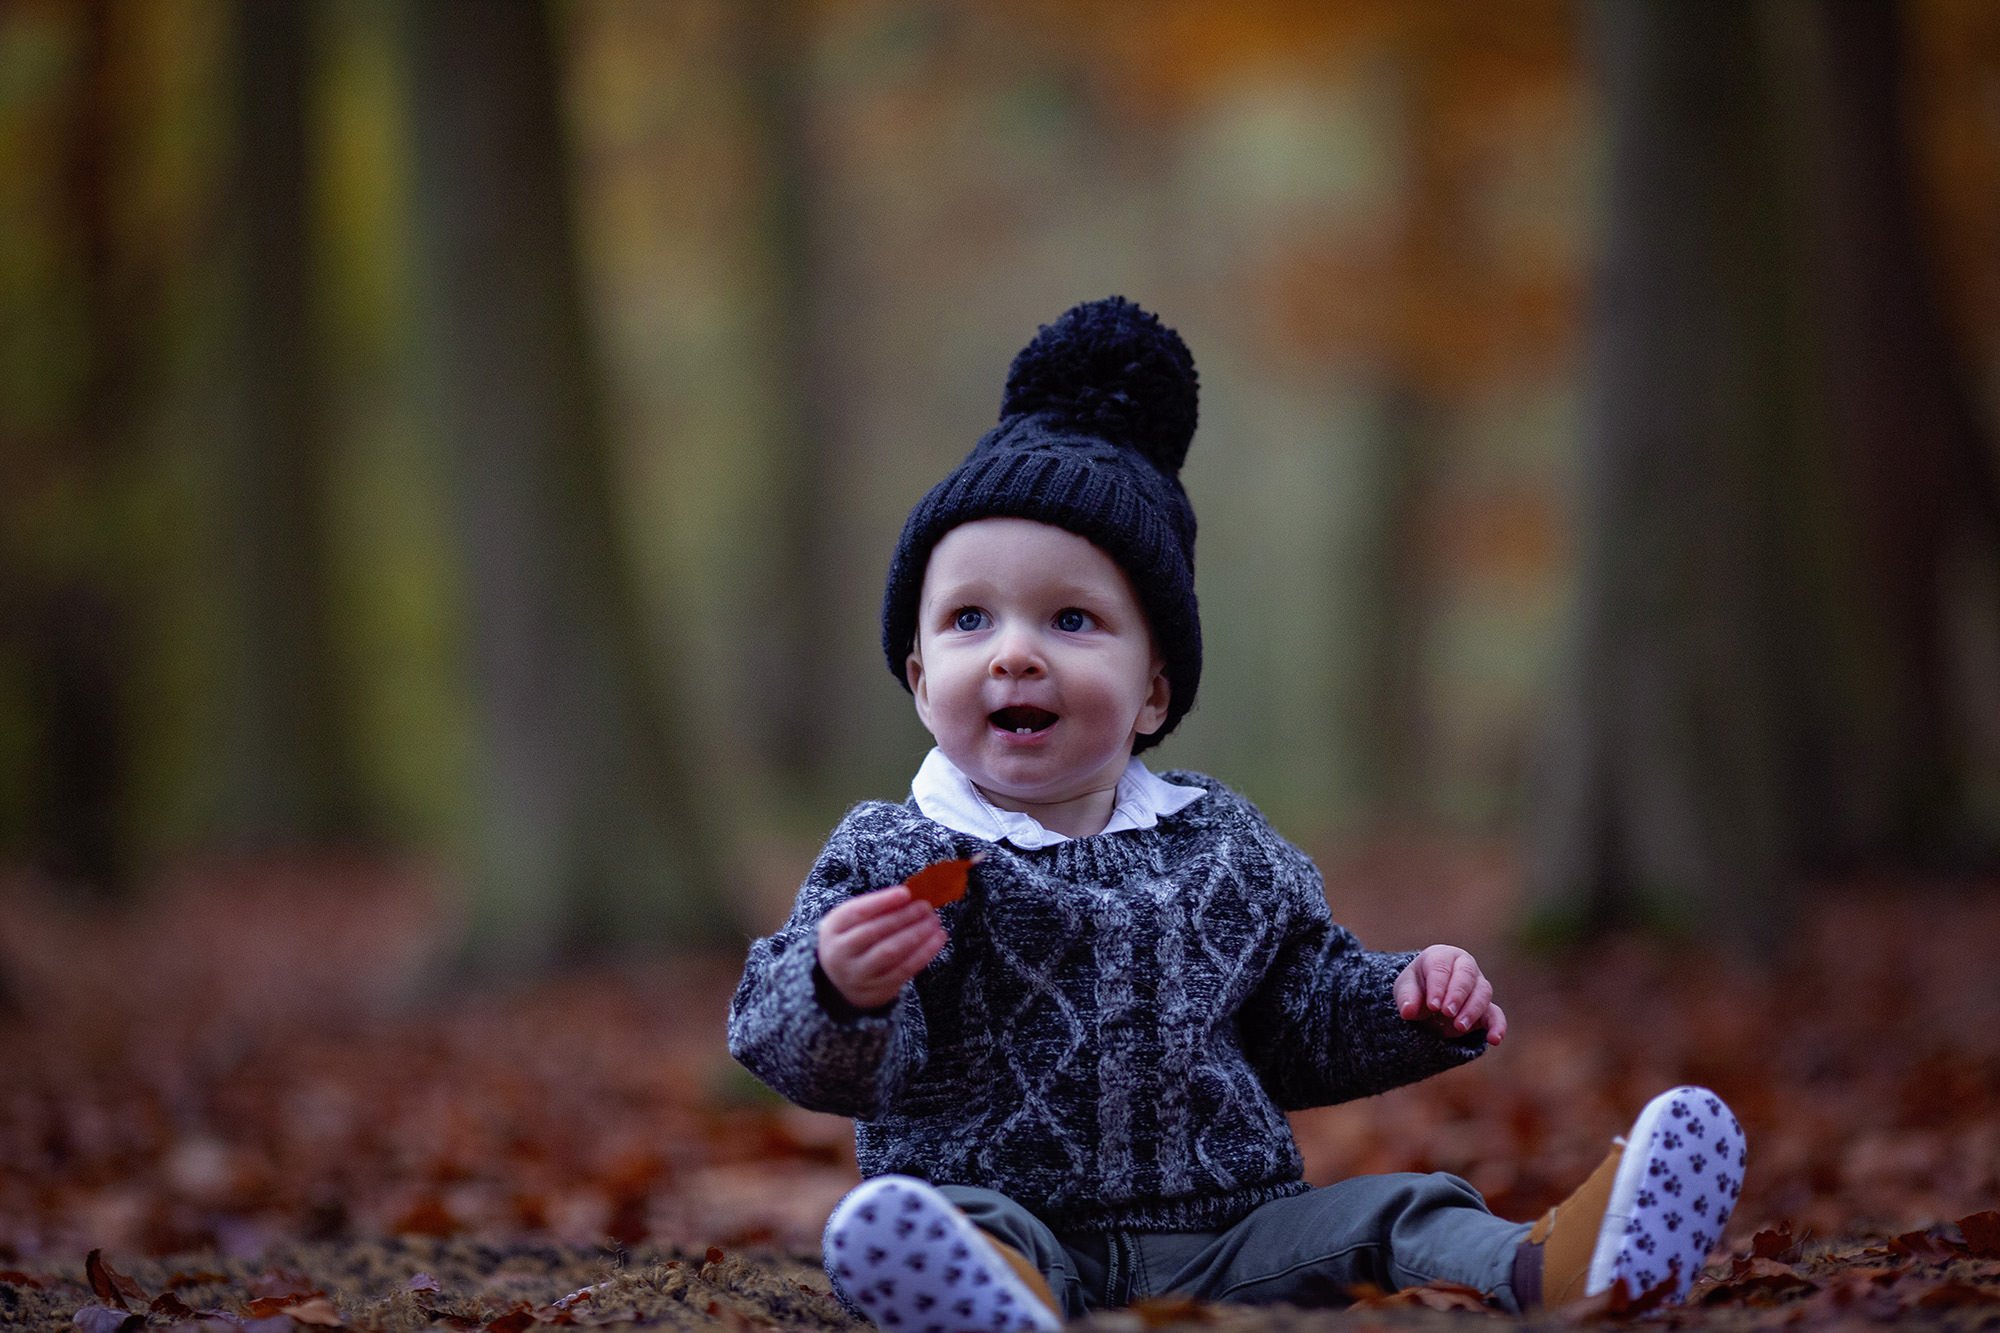 Toddler photoshoot in Autumn leaves